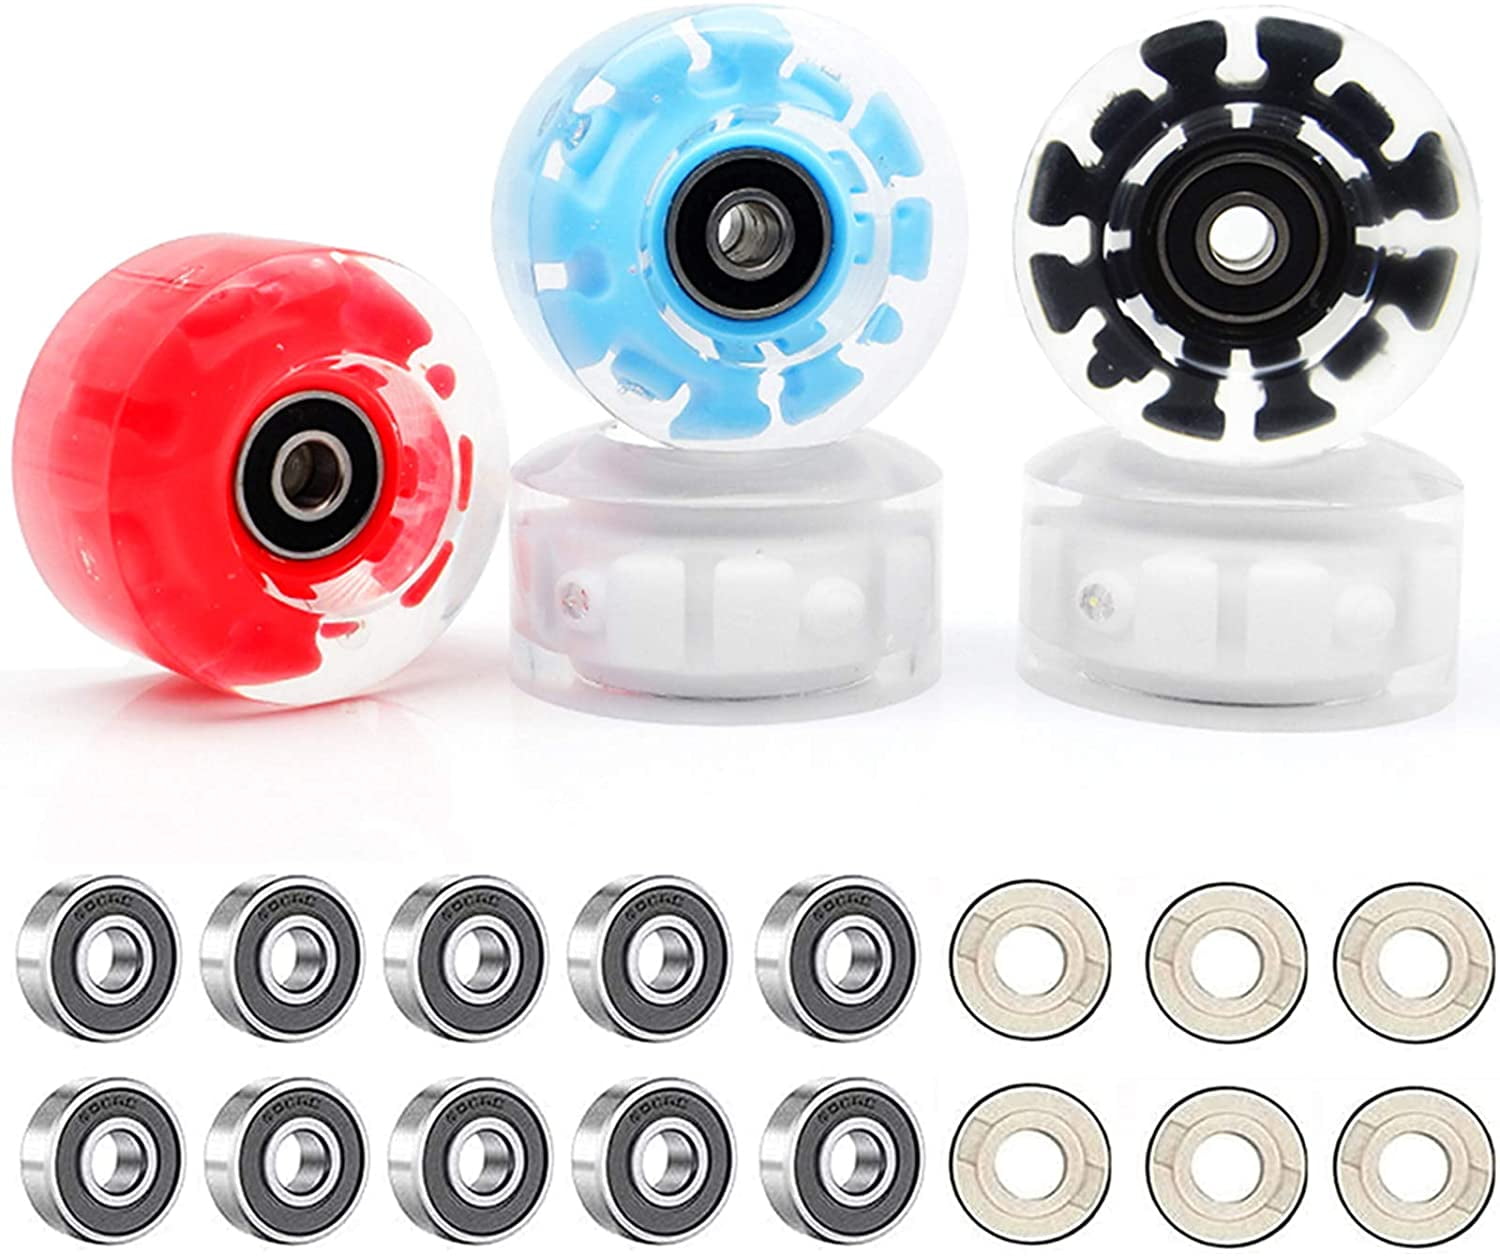 Details about   4PC Luminous Light Up Quad Roller Skate Wheels with BankRoll Bearings Installed 